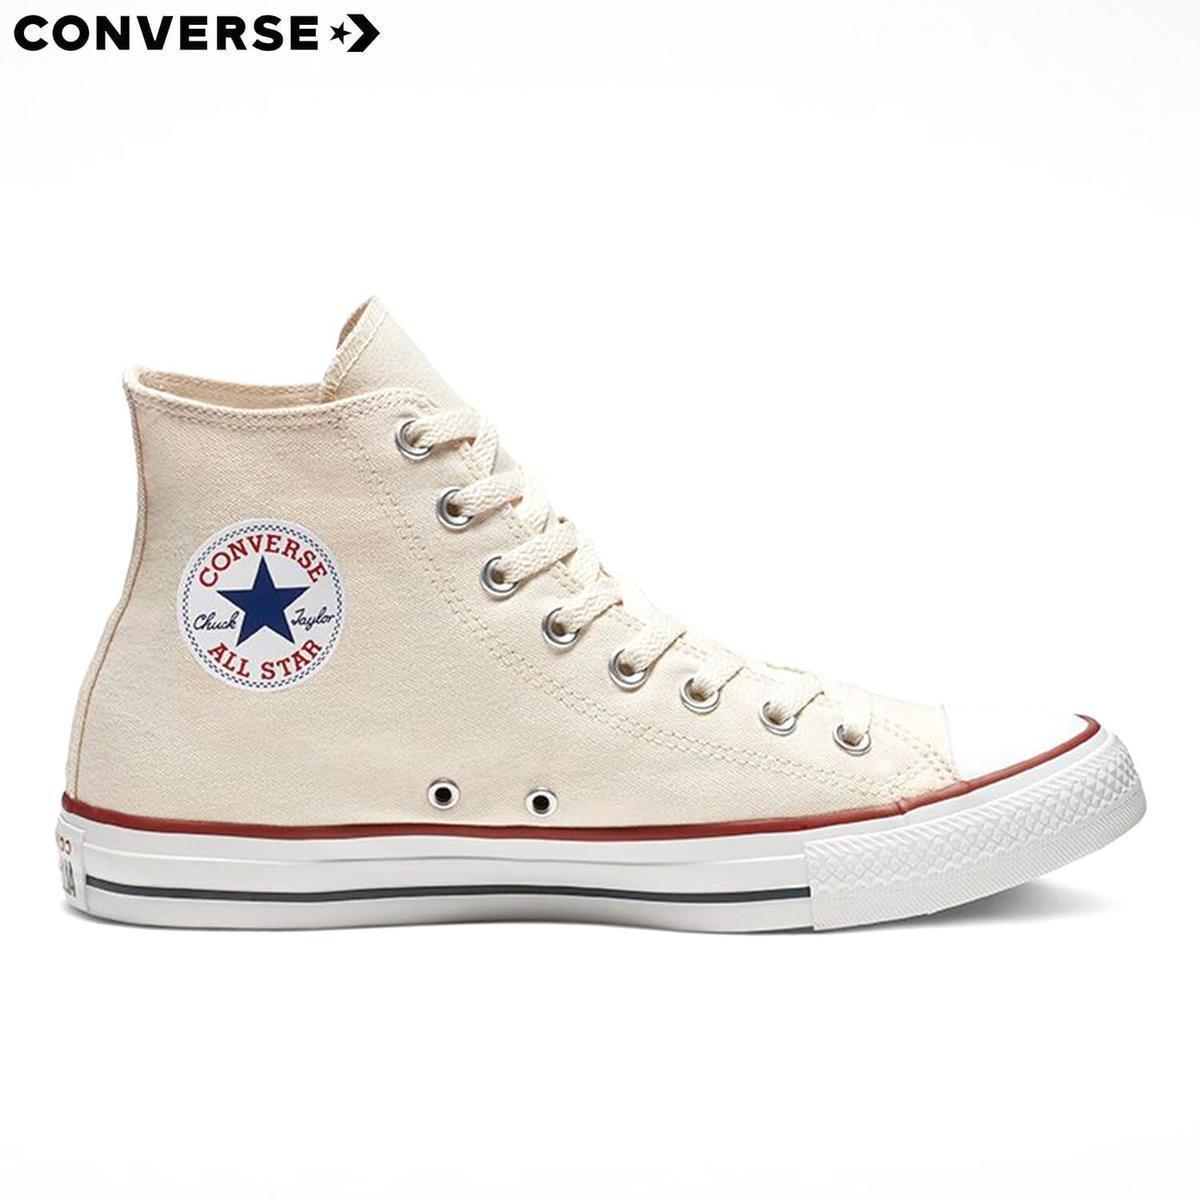 converse chuck taylor all star hi top natural ivory shoes for unisex 1w897c